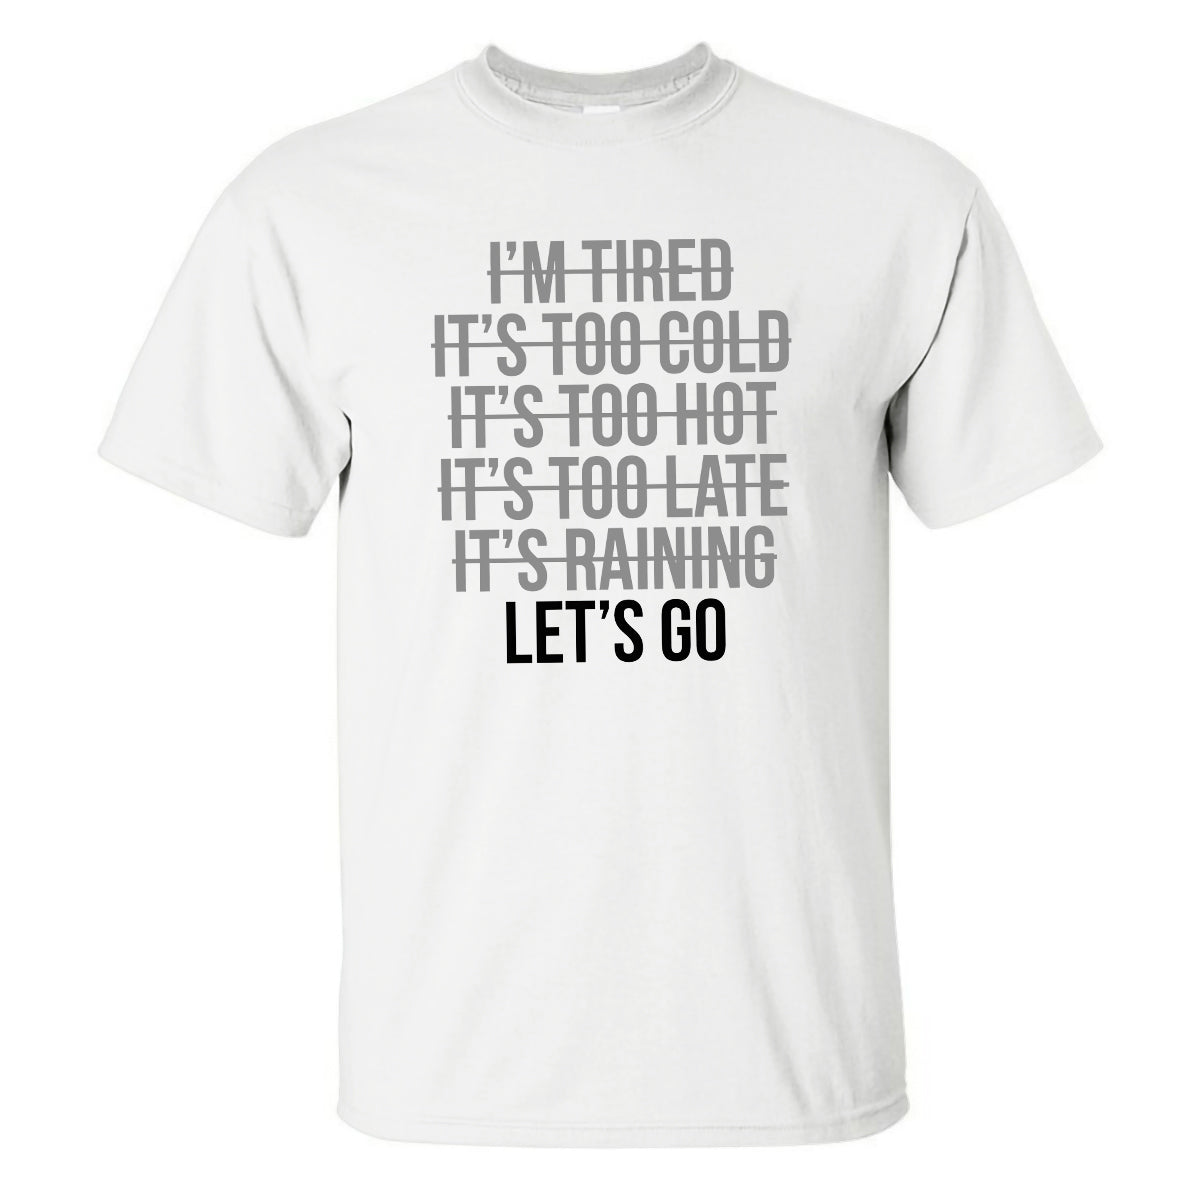 Let's Go Printed Casual Men's T-shirt